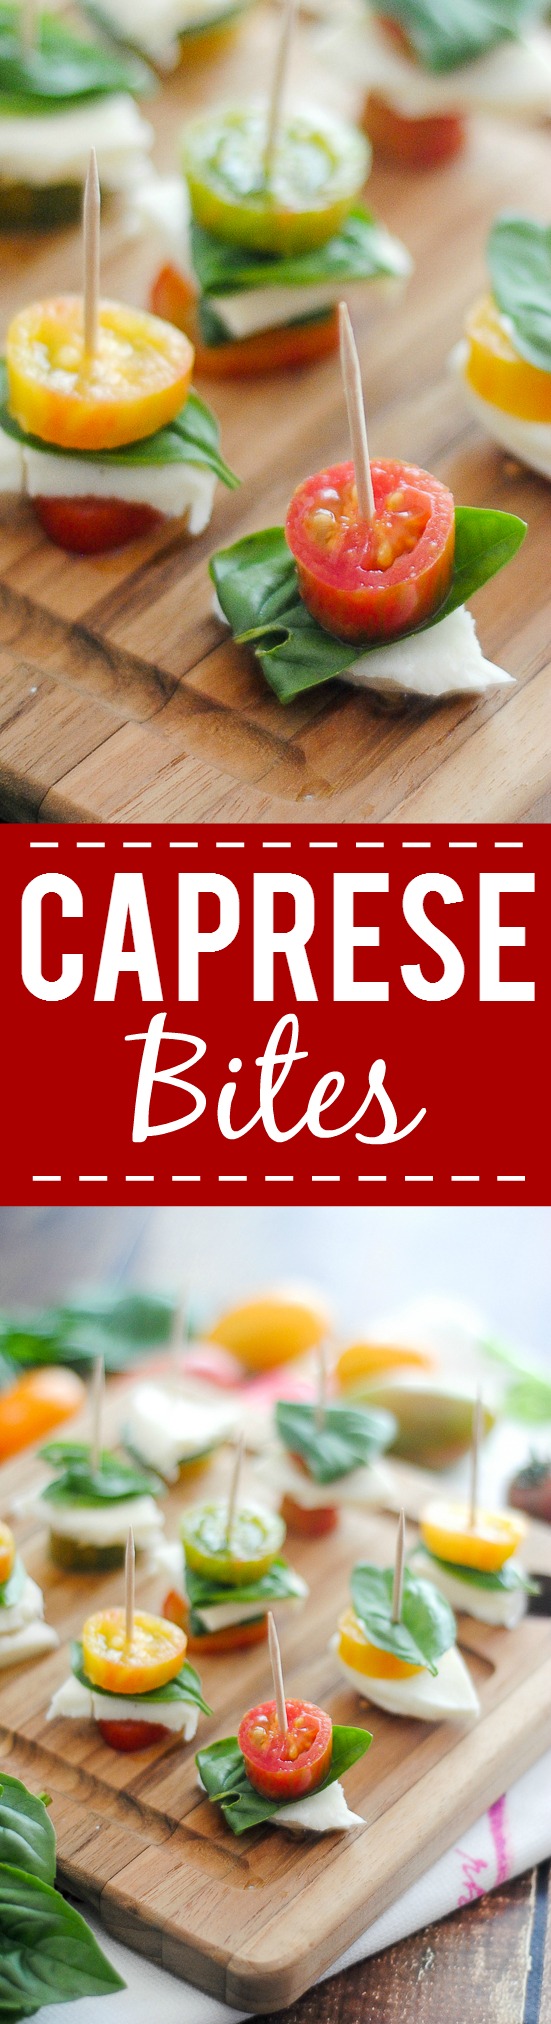 Caprese Bites Recipe - A fresh and simple appetizer or snack, these Caprese Bites are easy to make and delicious to eat! Great way to use up fresh Summer produce. Super easy appetizer recipe!